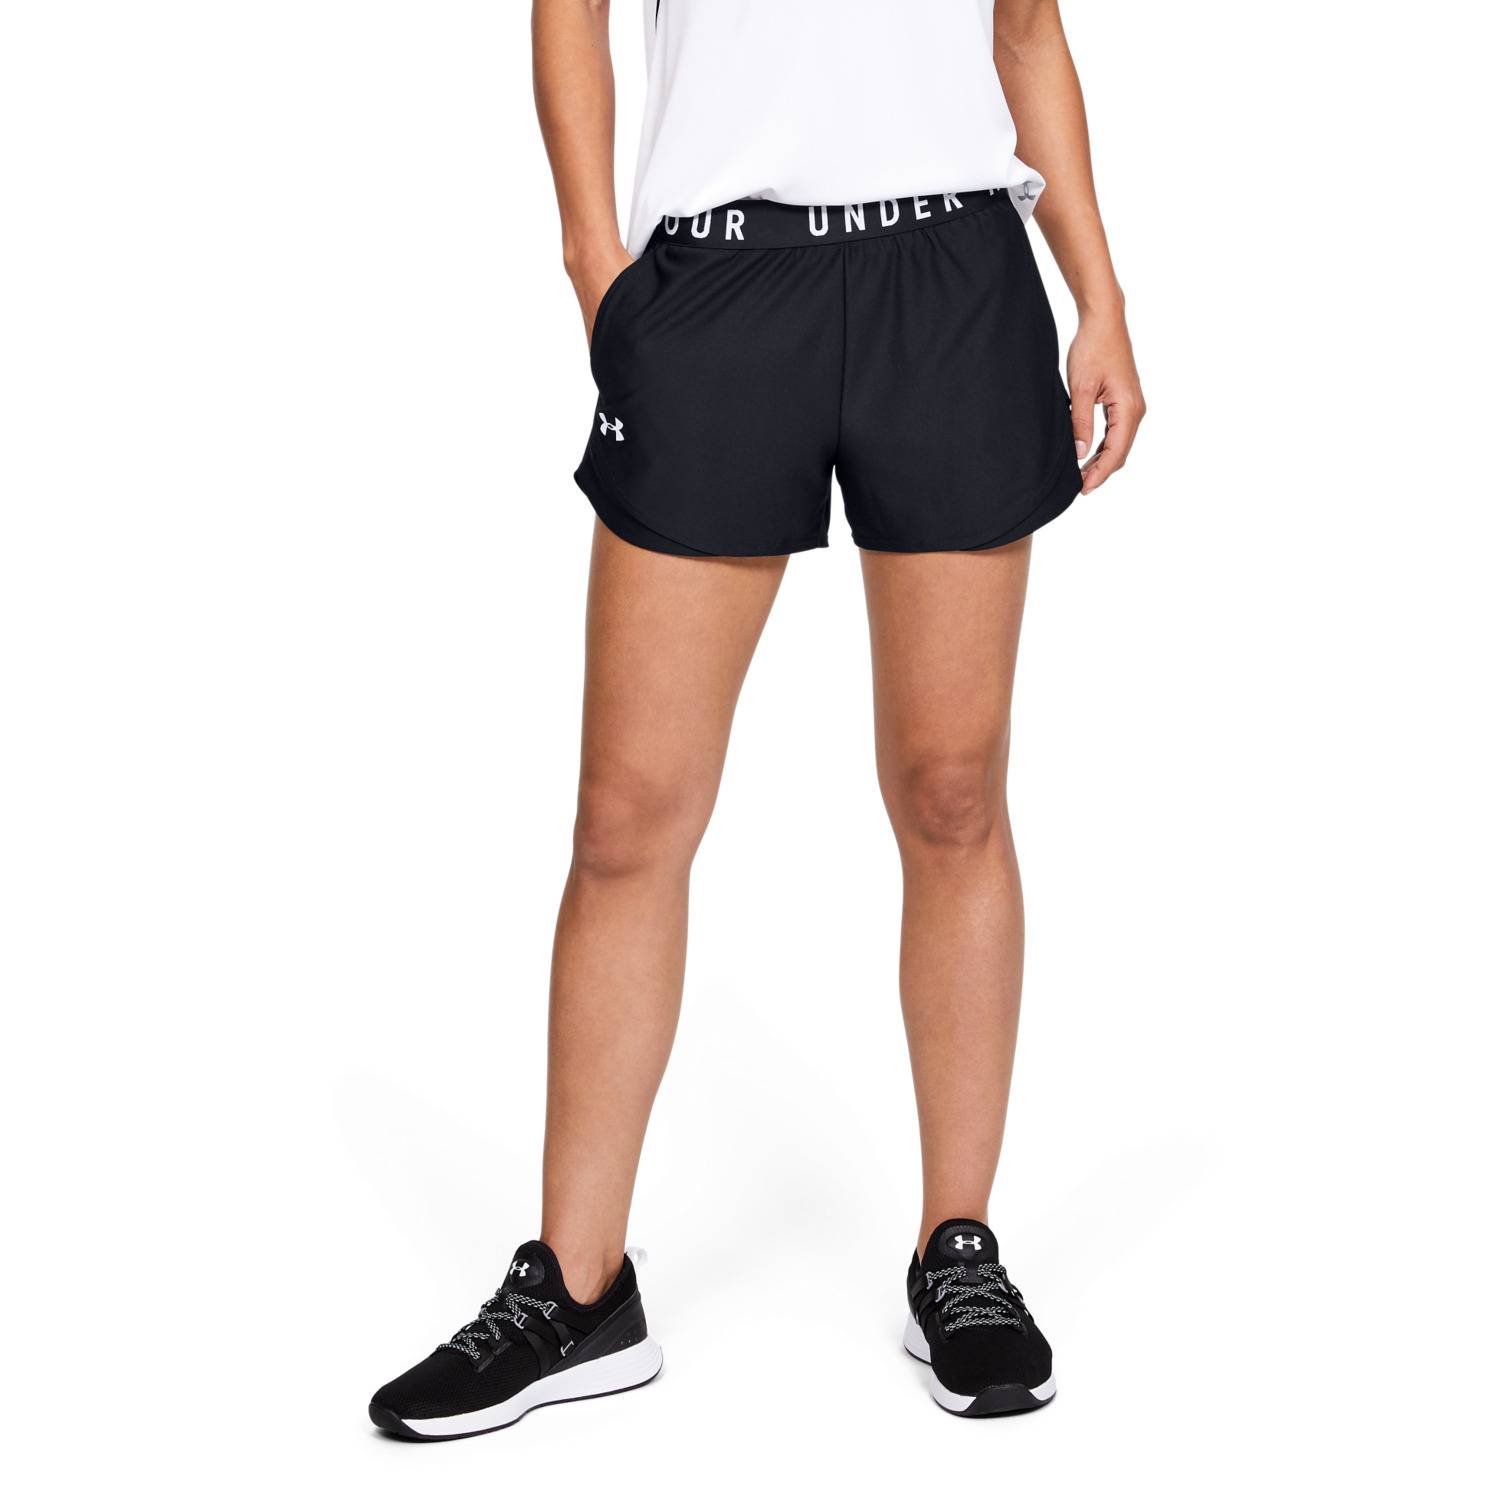 UNDER ARMOUR Short Mujer Play Up Shorts 30-B Negro UNDER ARMOUR